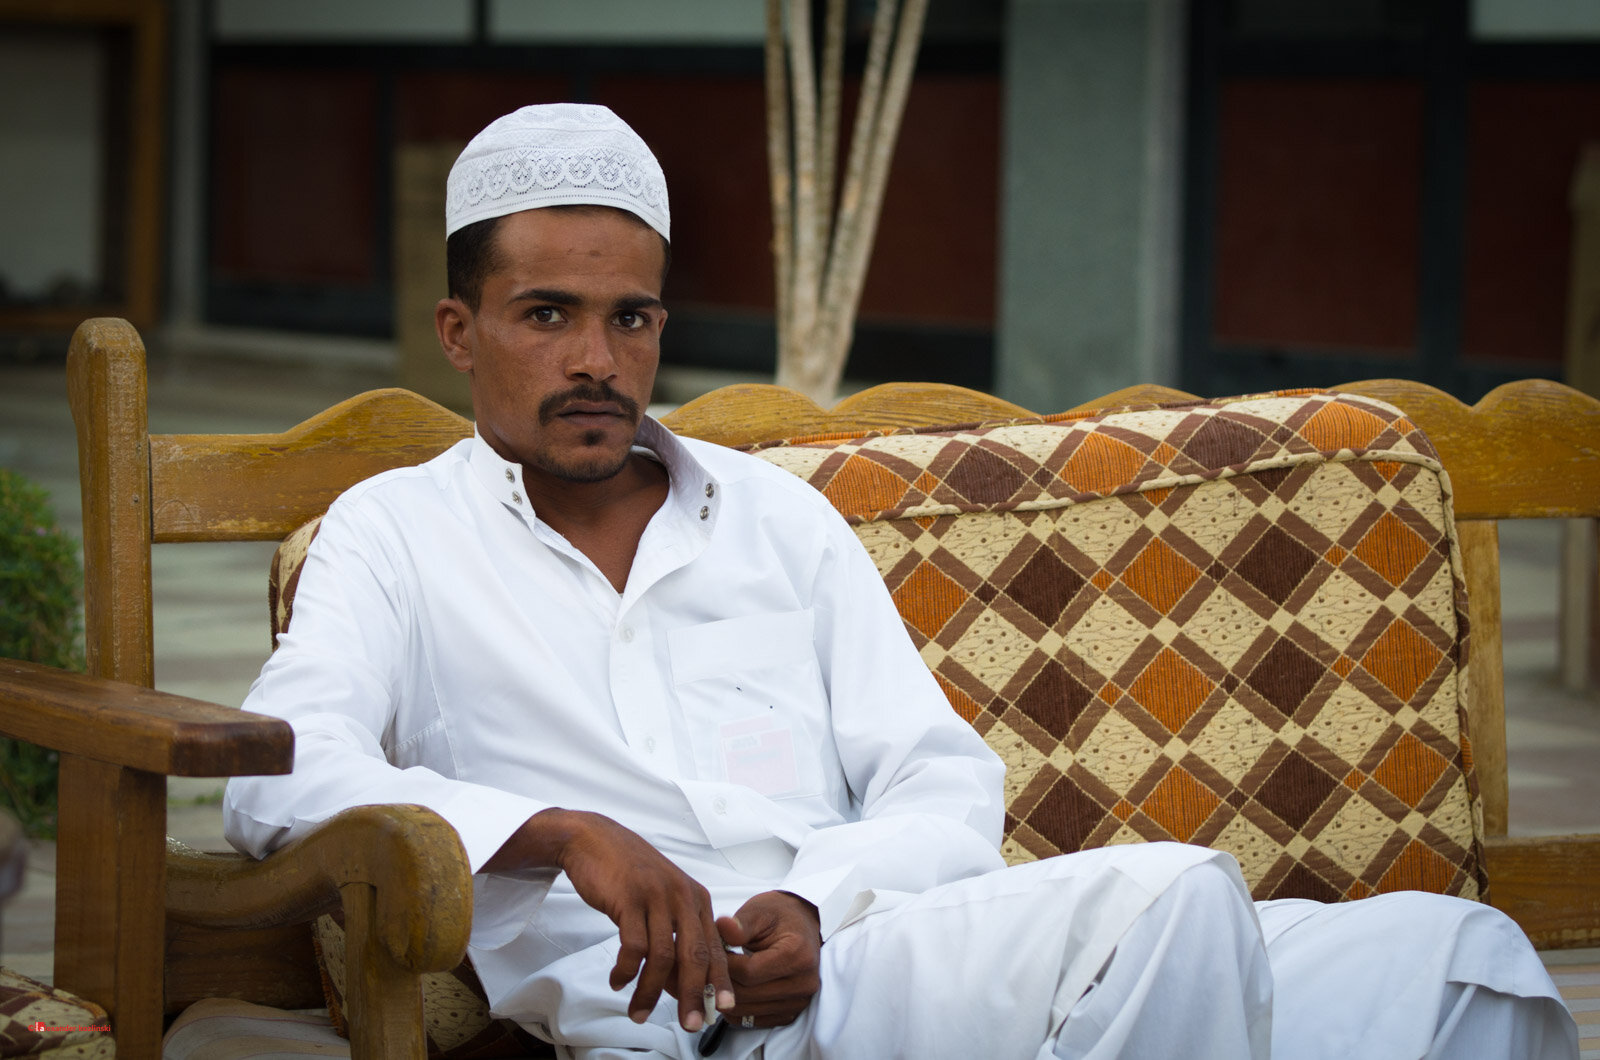 A young man from Dahab.